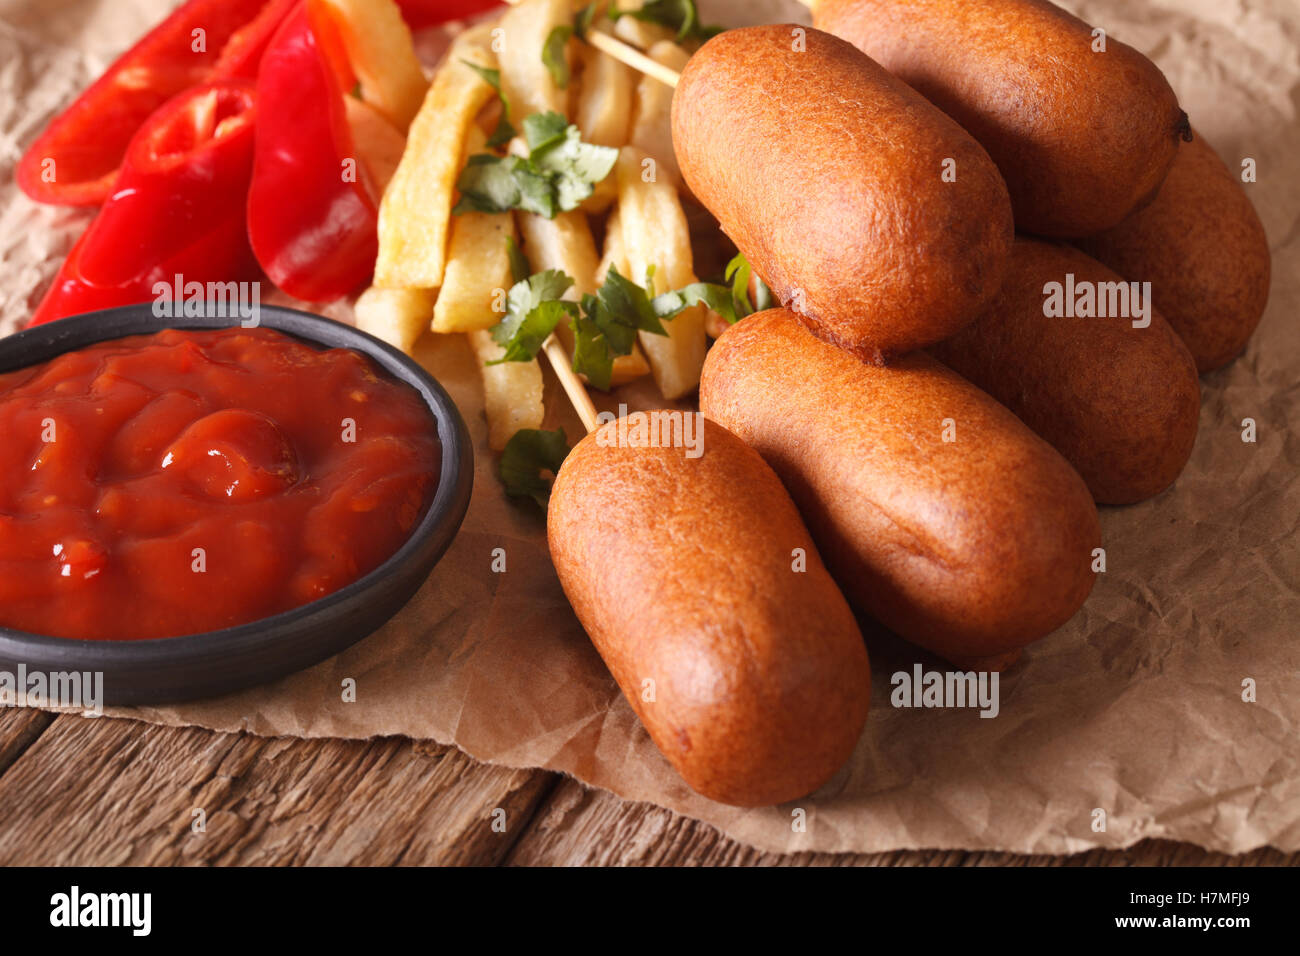 American fast food: Corn dogs, french fries and ketchup on the table close-up. horizontal Stock Photo